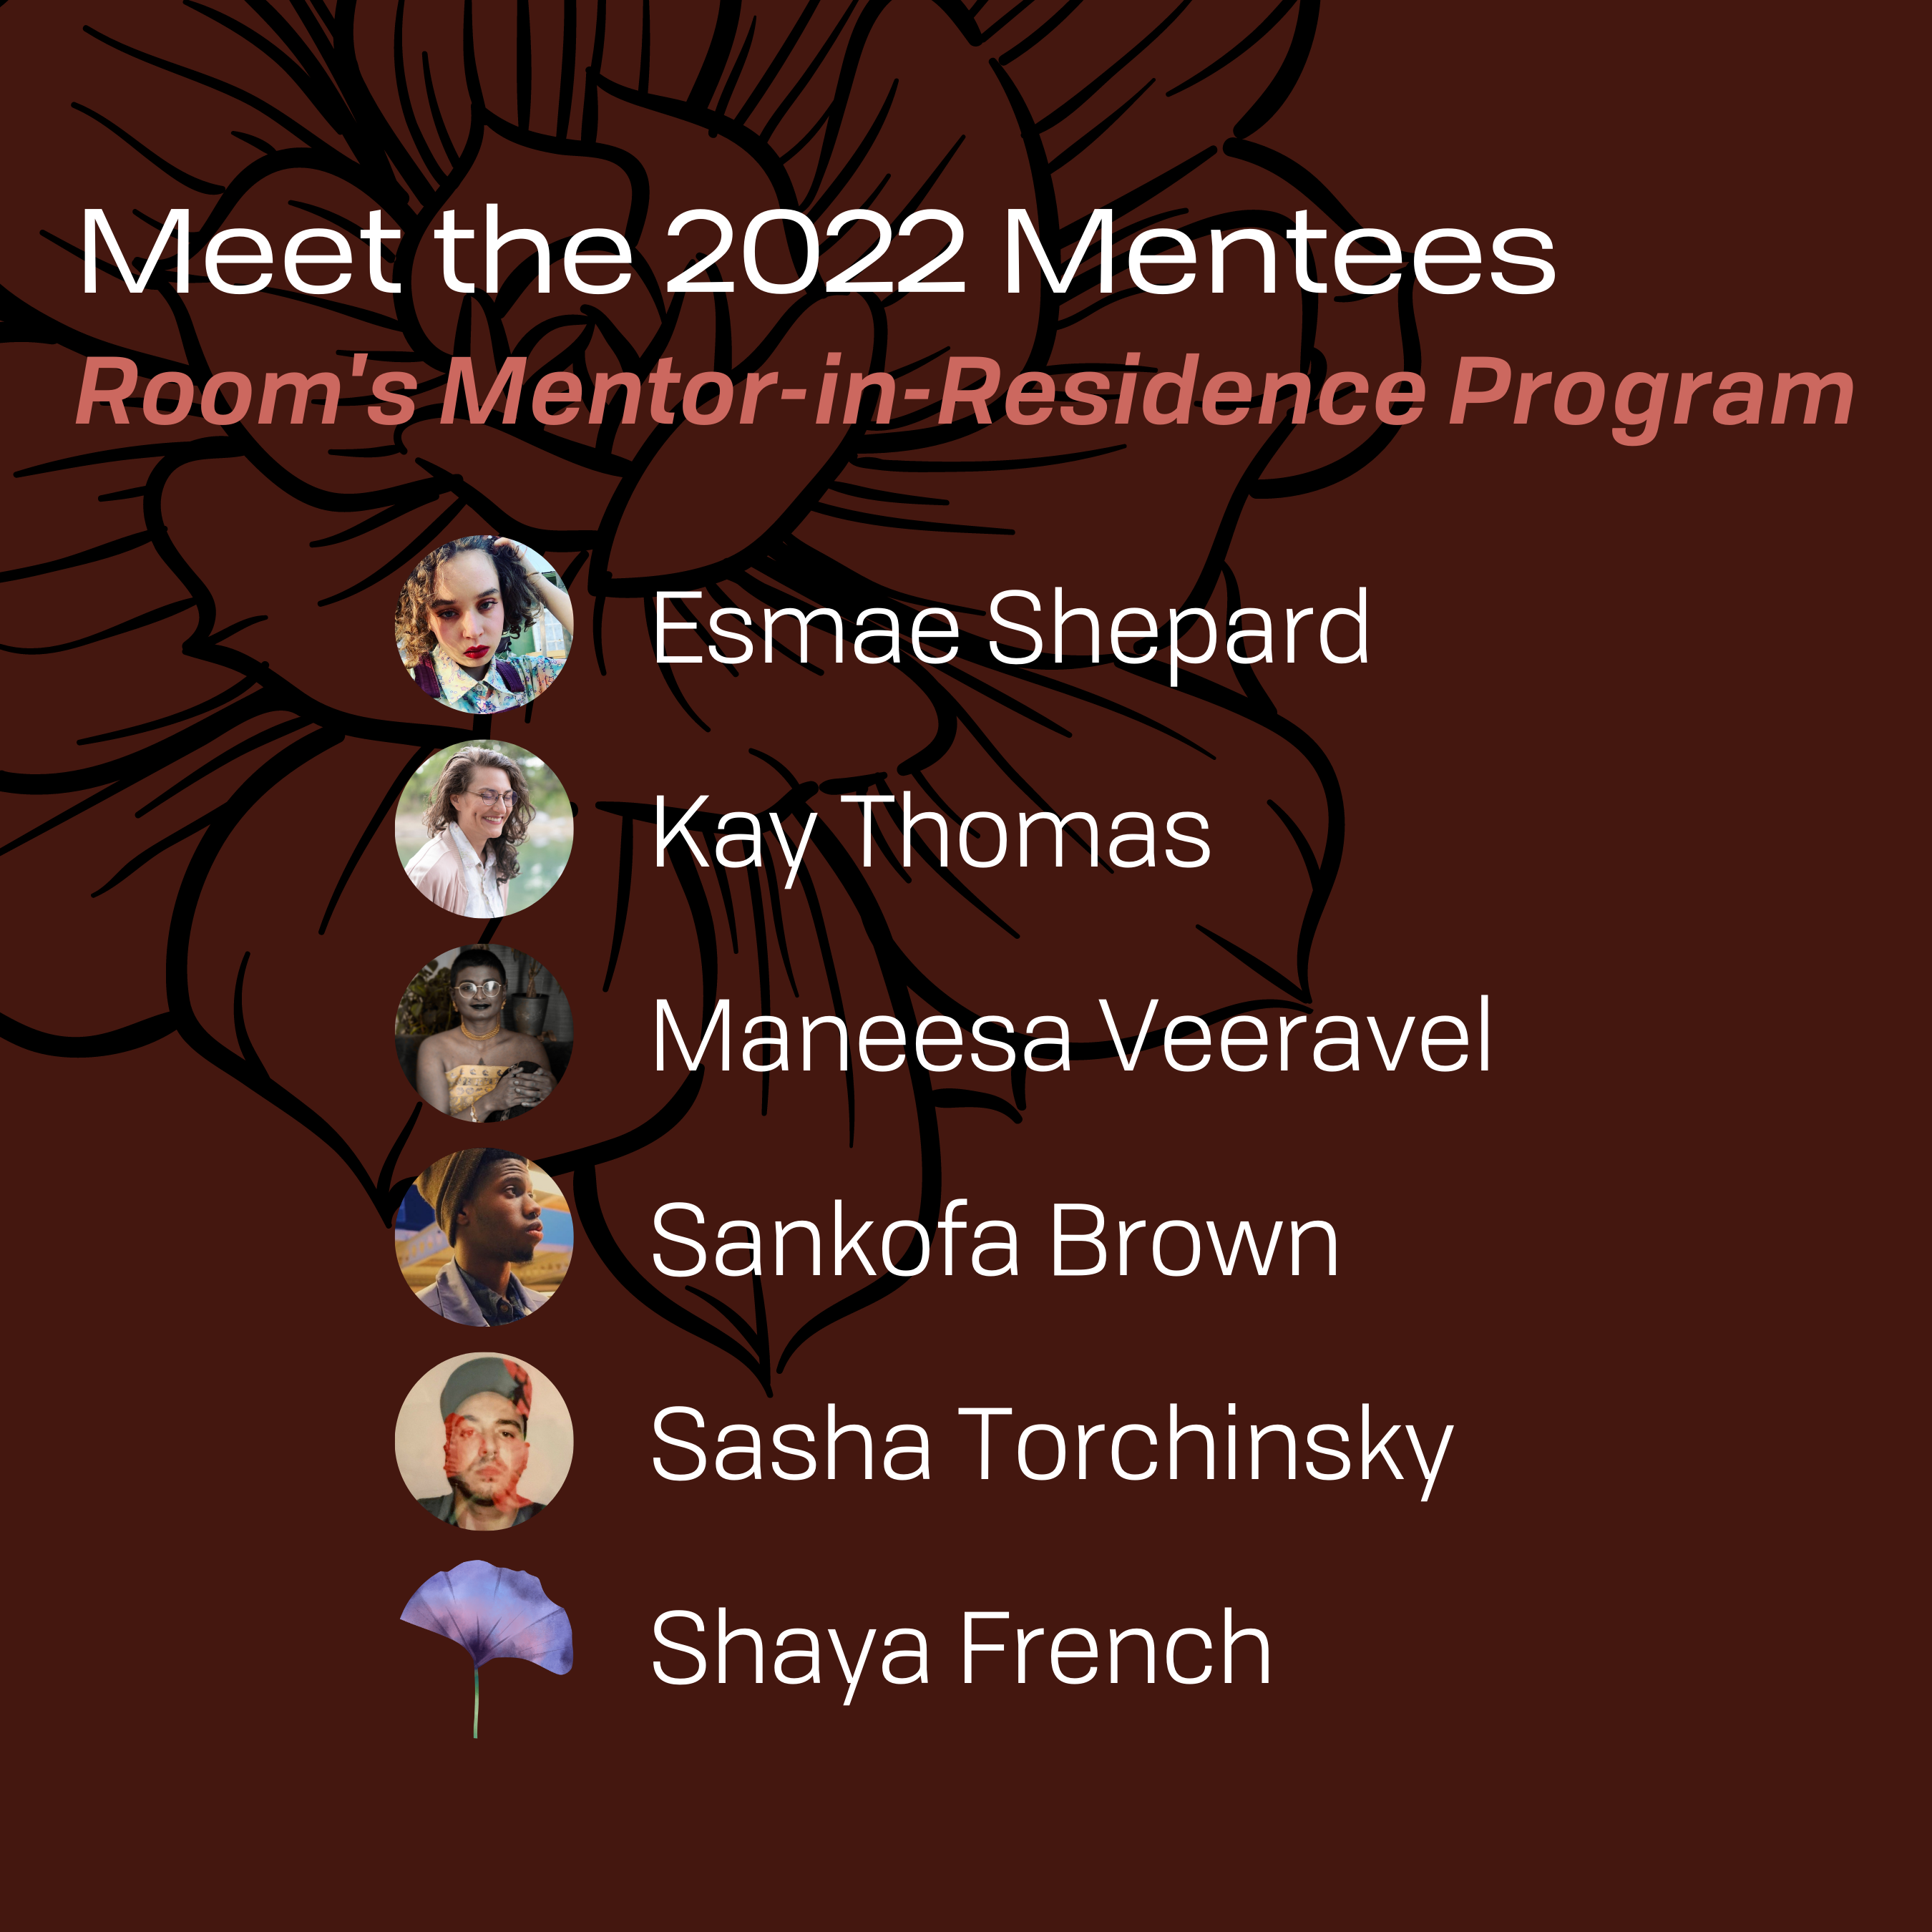 A graphic with the words "Meet the 2022 Mentees: Room's Mentor-in-Residence Program," followed by the mentee names: Esmae Shepard, Kay Thomas, Maneesa Veeravel, Sankofa Brown, Shasha Torchinsky, and Shaya French